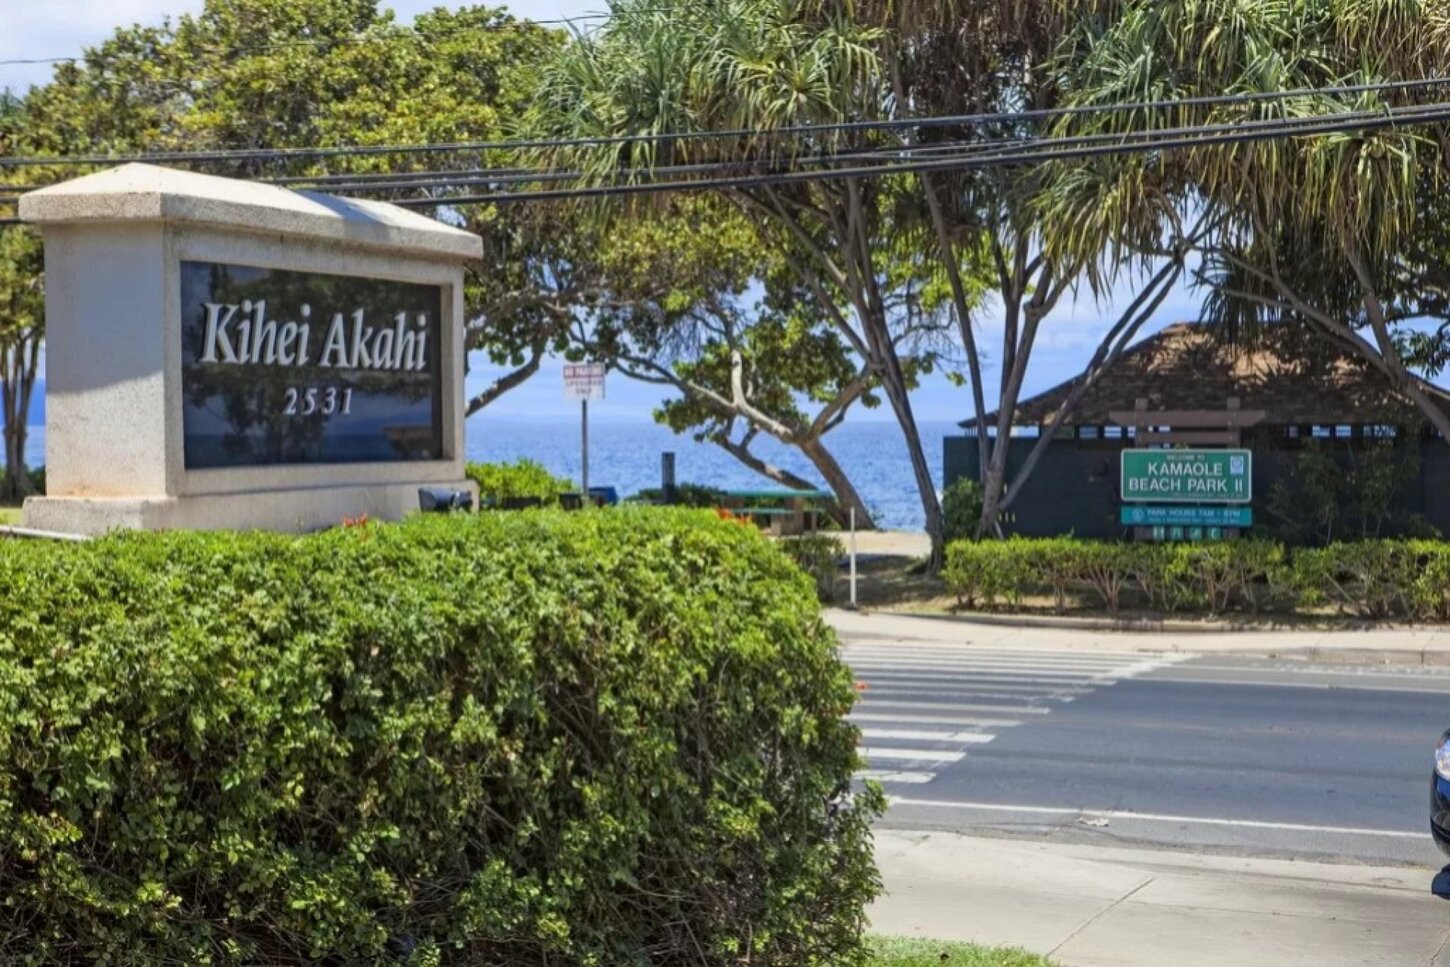 Kamaole II is literally across the street! One of the best beaches in Maui!  Kihei Akahi is so conveniently located!